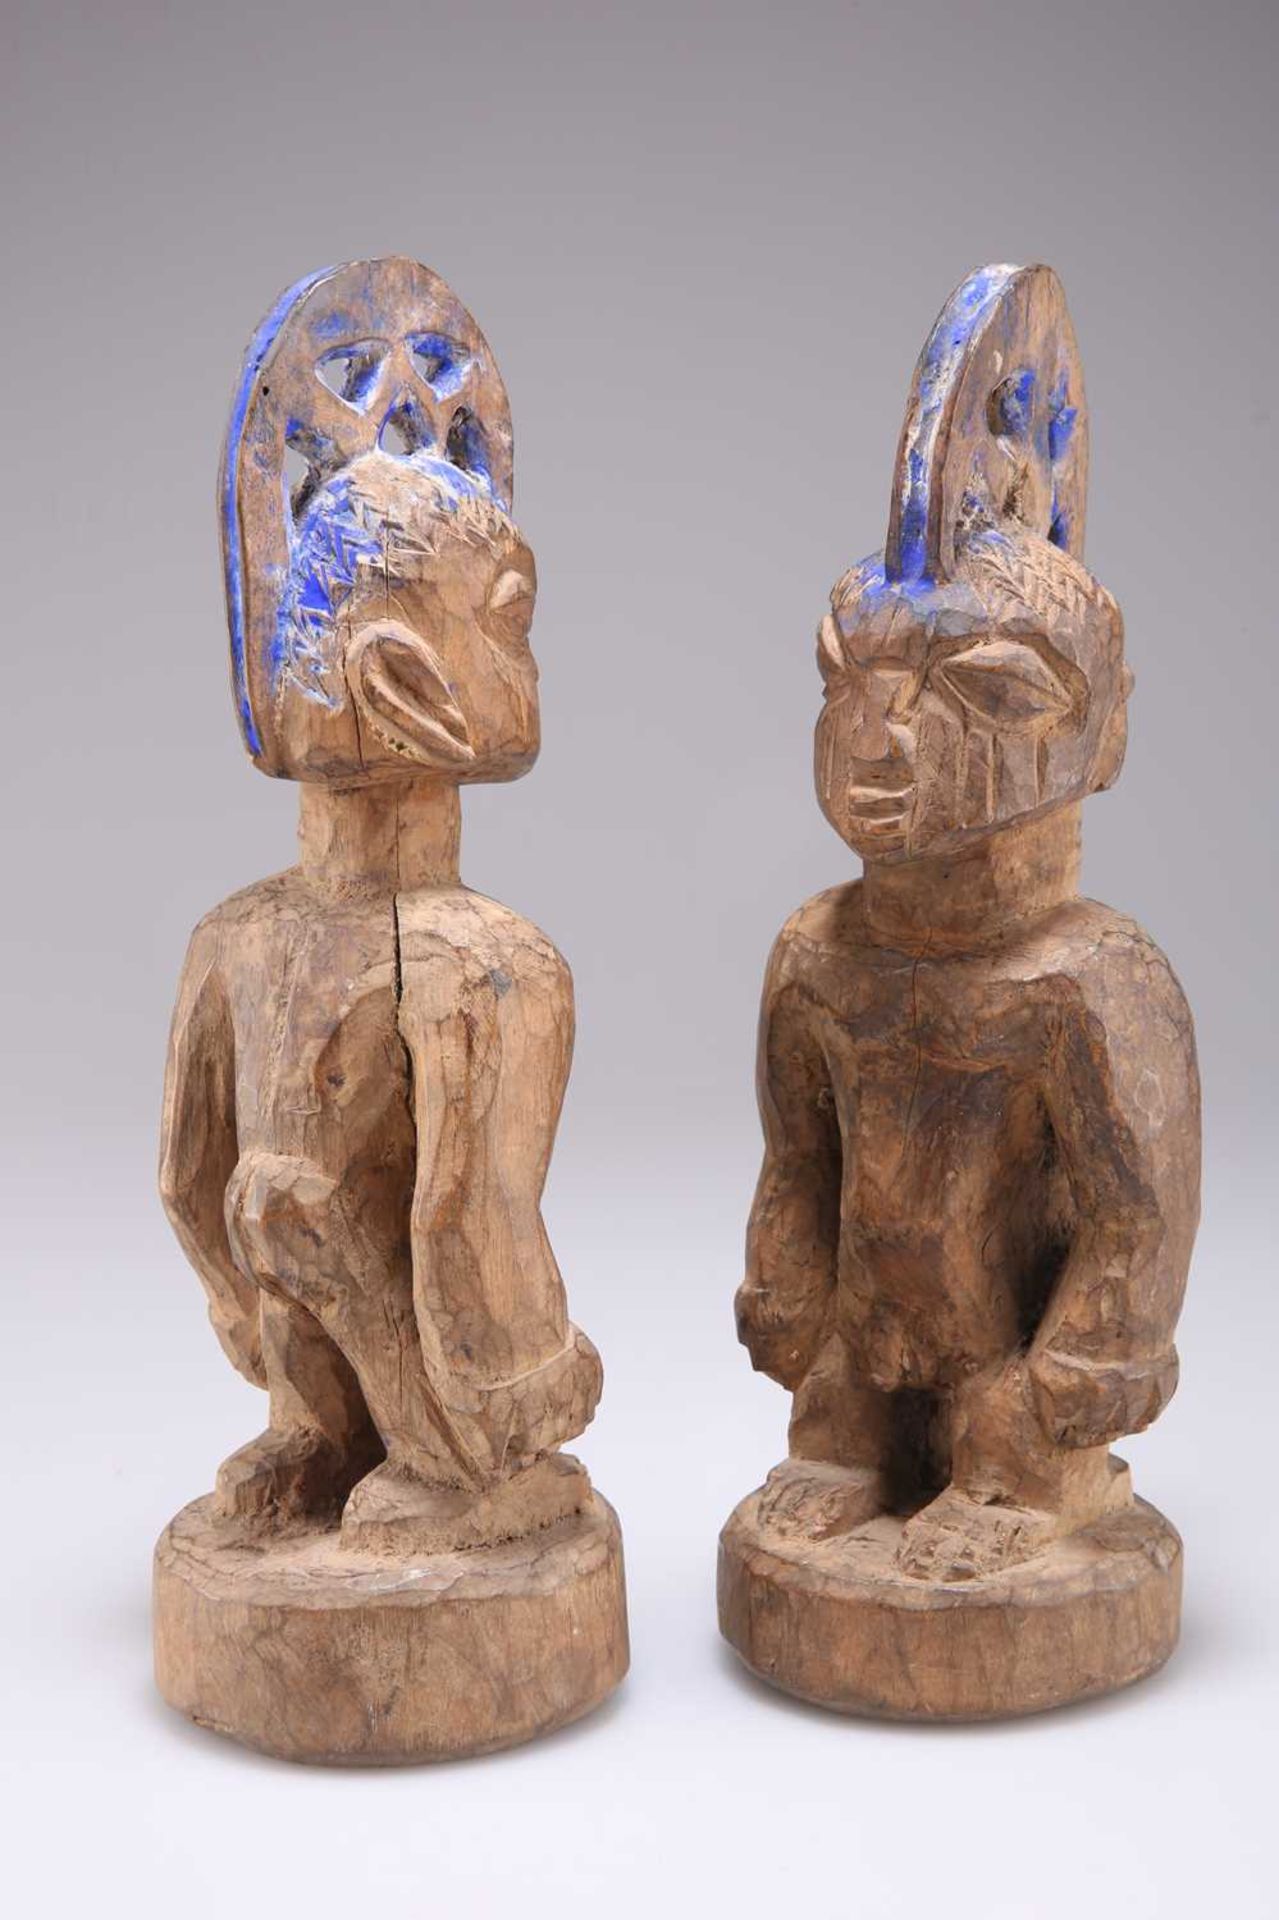 A PAIR OF NIGERIAN YORUBA 'ERE IBEJI' TWIN MALE CARVED WOODEN FIGURES, EARLY 20TH CENTURY - Image 2 of 2